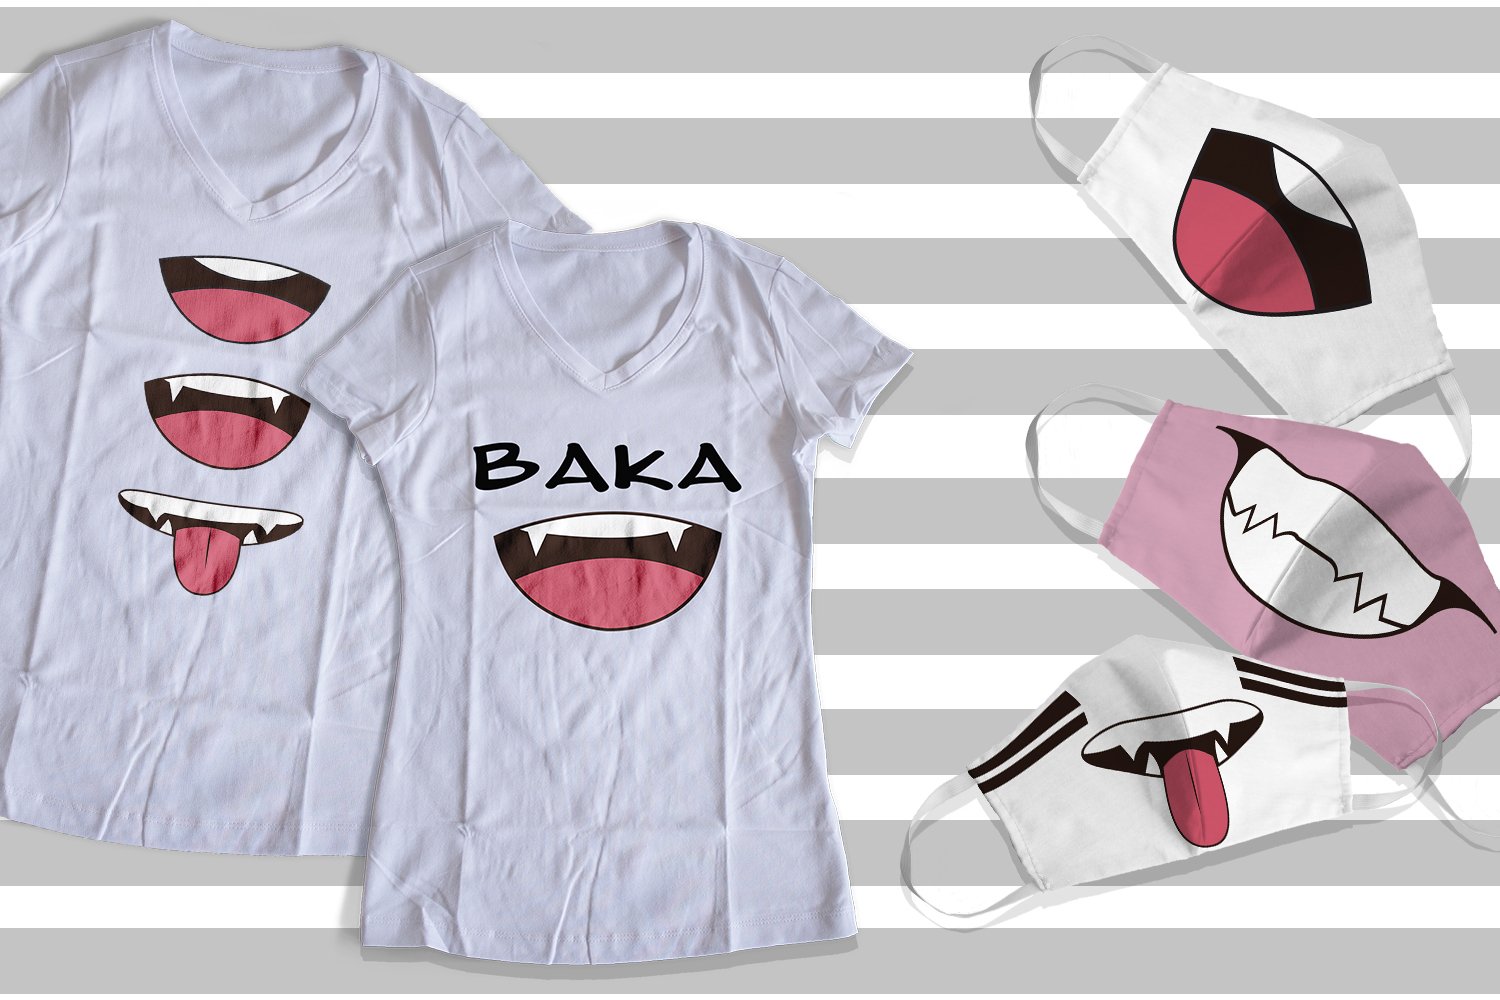 2 white t-shirts and 3 masks with an illustrations of an anime mouth on a gray and white striped background.